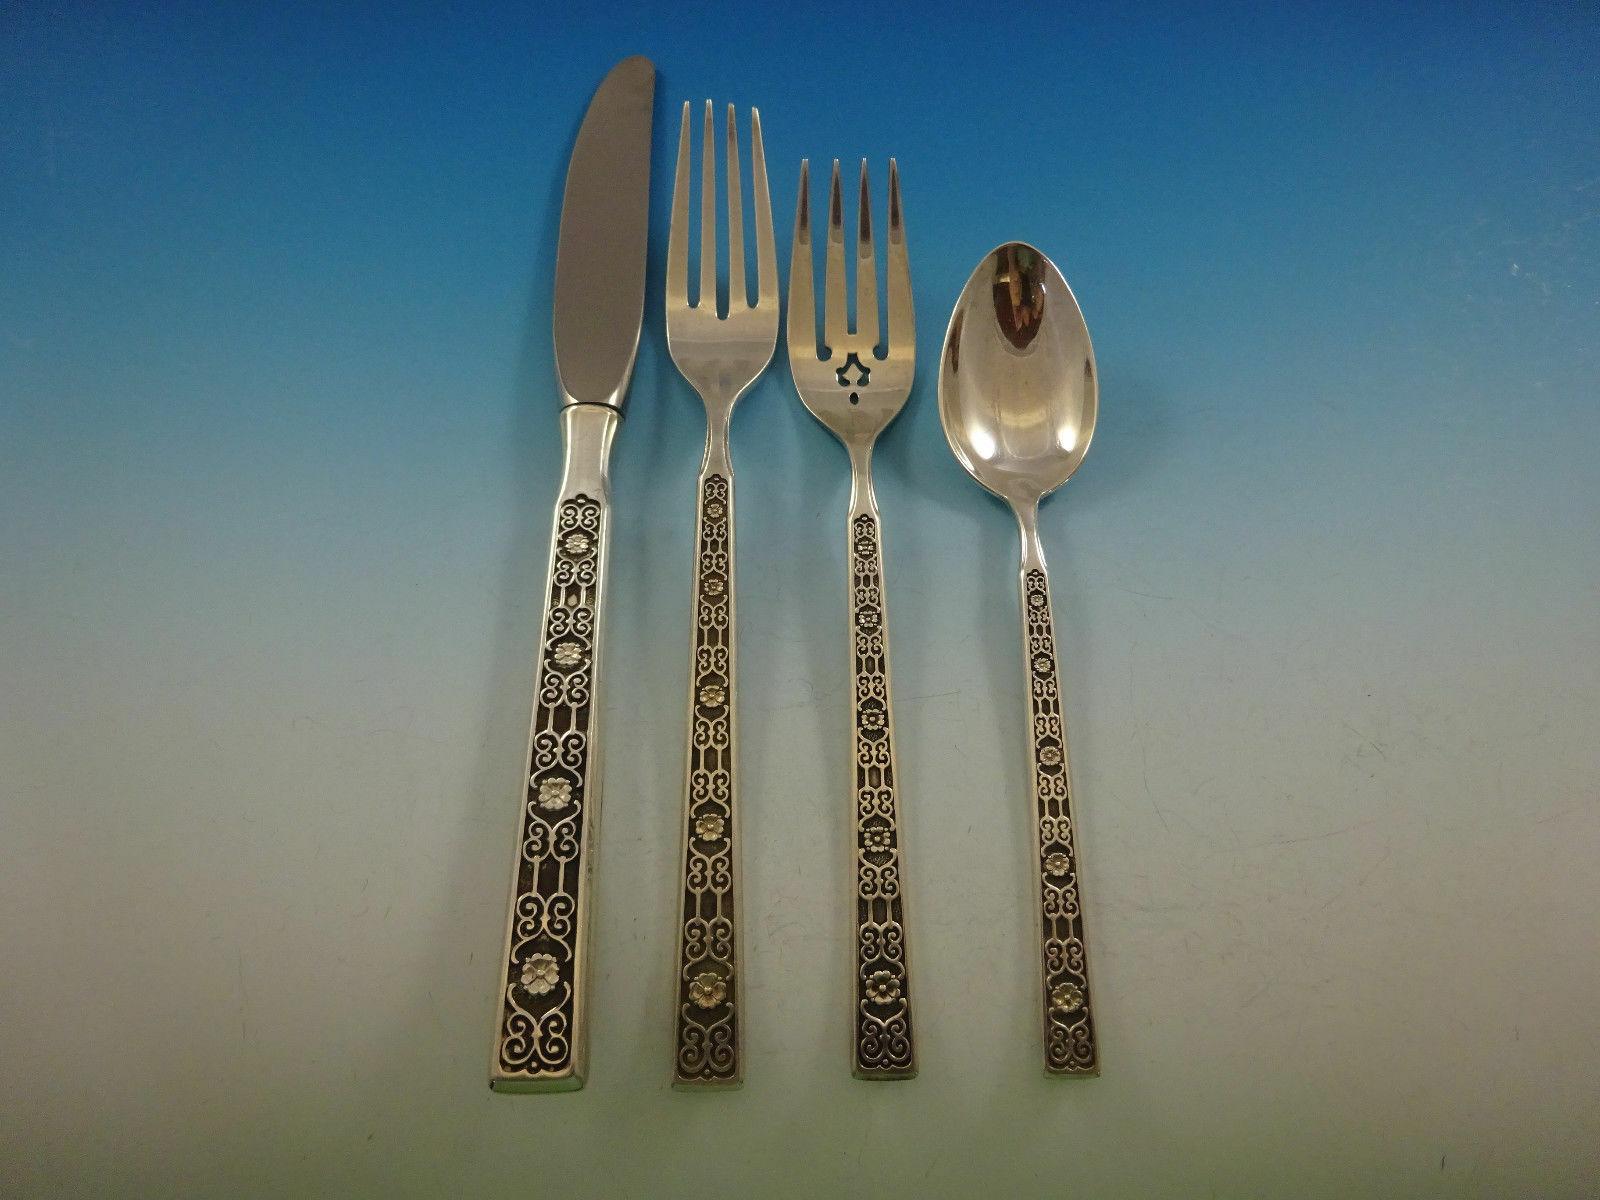 Spanish Tracery by Gorham sterling silver flatware set - 45 pieces. This set includes:

8 knives, 9